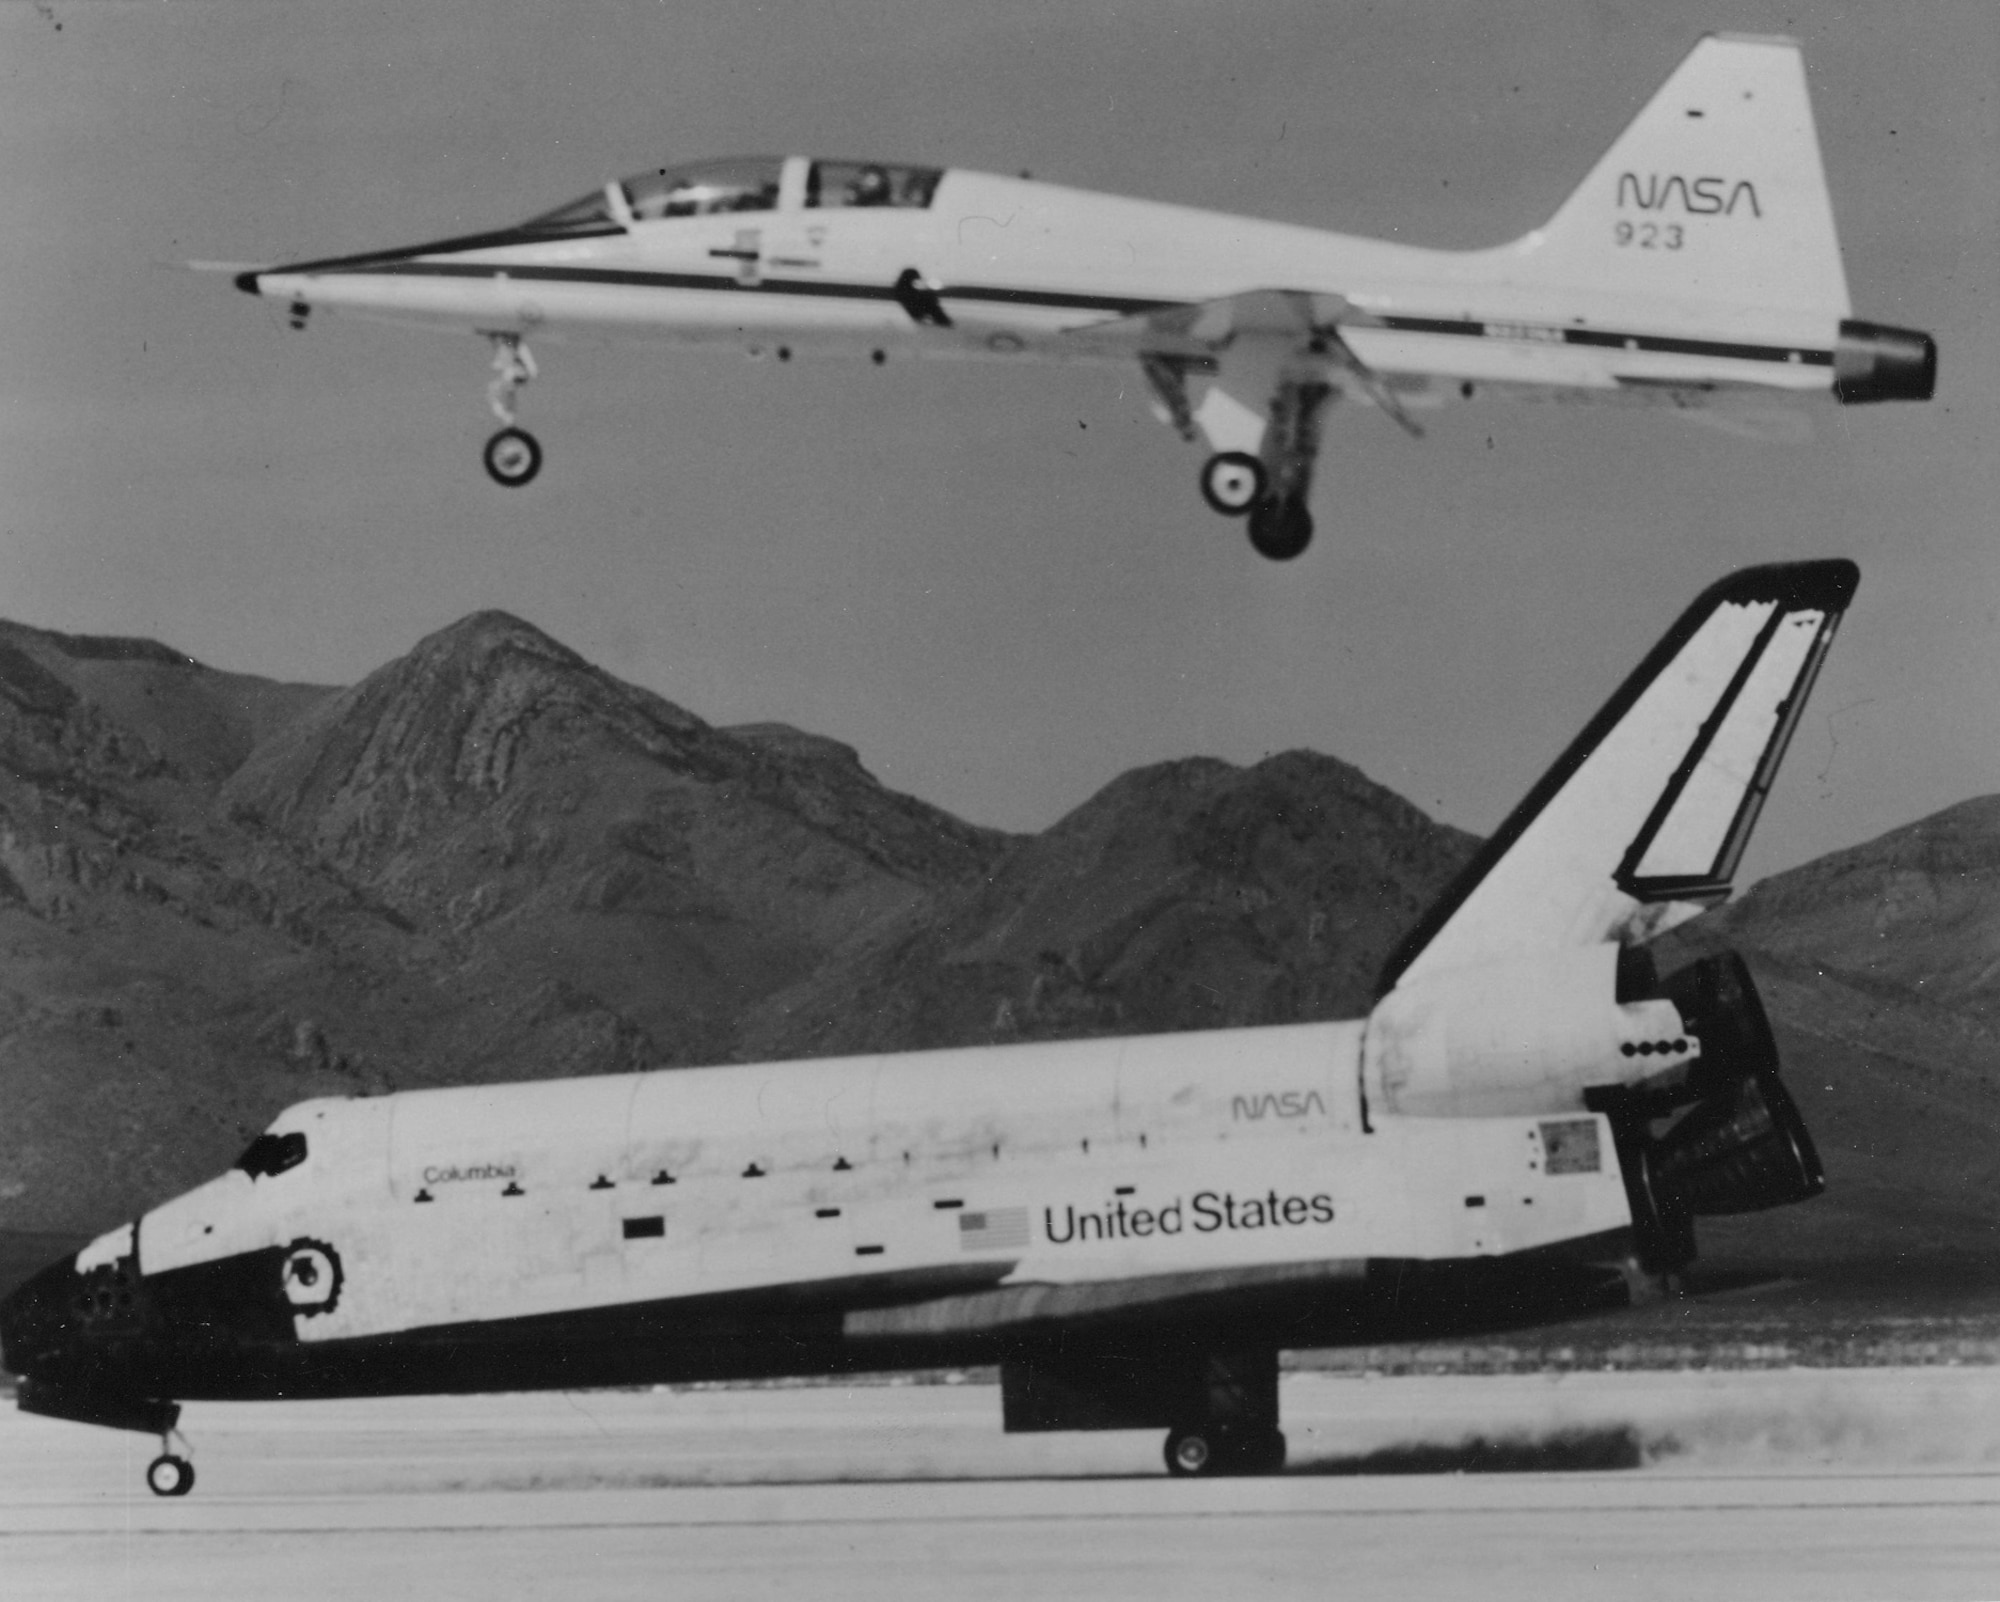 The Space Shuttle Orbiter Columbia lands in 1982 in southern New Mexico after seven days in space, where the astronauts tested their ability to deploy and capture objects, and even keep house. On April 15, 1982, the U.S. House of Representatives renamed the Strip, where Columbia landed, to White Sands Space Harbor. NASA lost the Columbia and seven astronauts on Feb. 1, 2003, when it broke apart on reentry over Texas. (photo courtesy of New Mexico Museum of Space History)
